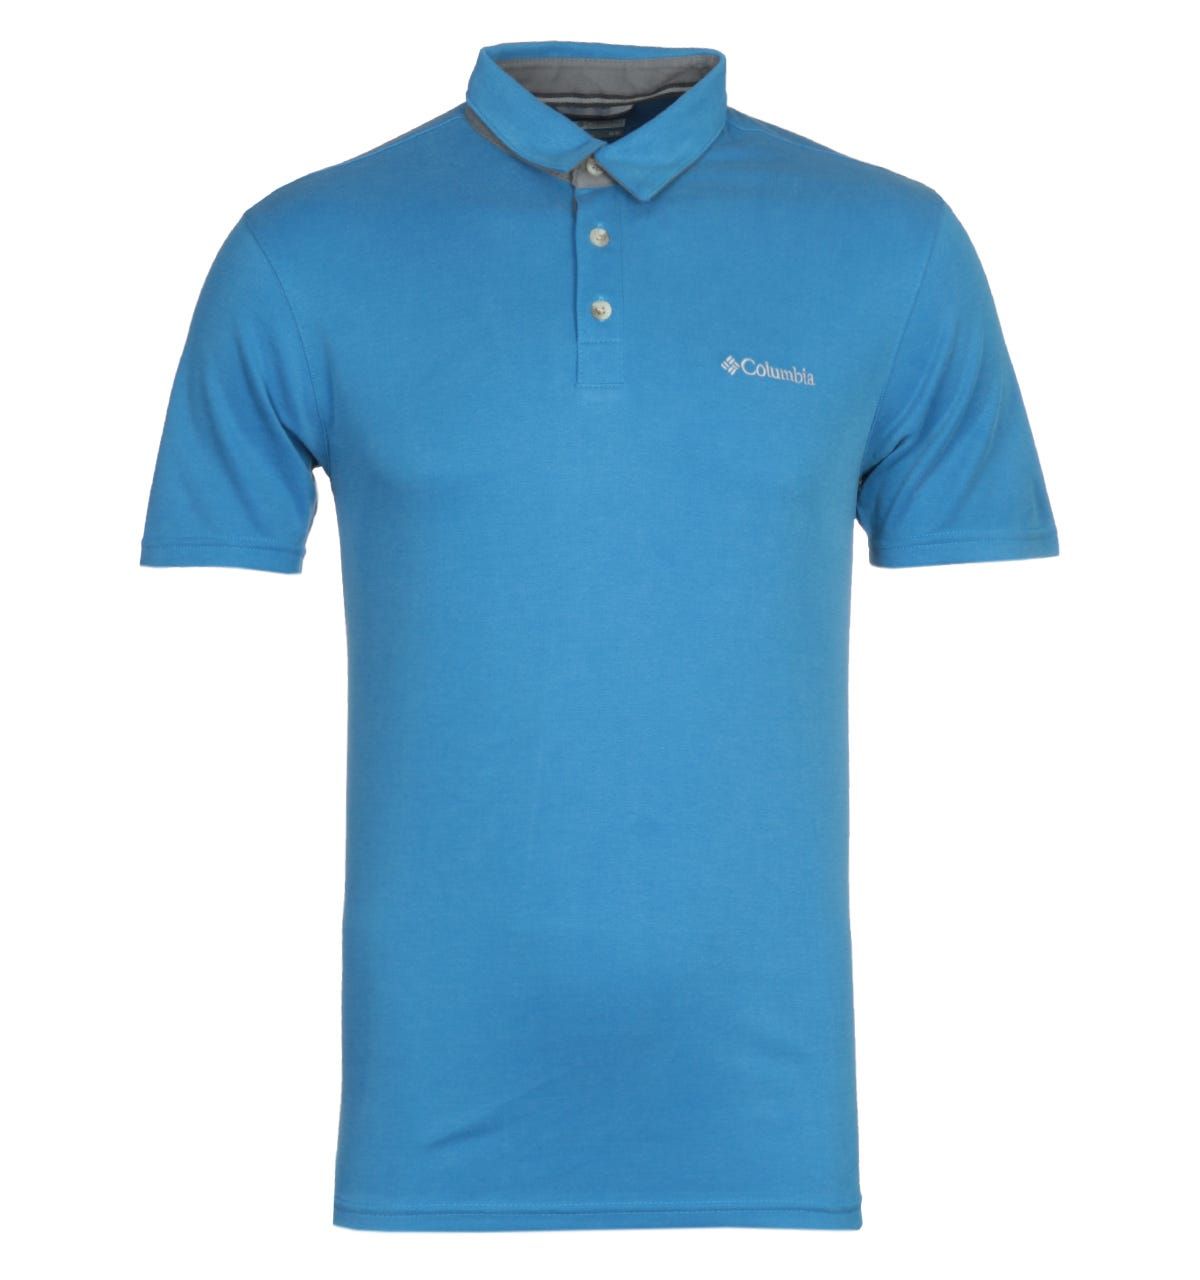 <p>A cool-season essential crafted by Columbia. The Columbia Nelson Point Blue Polo Shirt is a pure cotton composition fitted with a three-button placket and pointed down collar. The design is finished with the Columbia logo printed on to the chest.</p><ul><li>Cotton composition</li><li>Three button placket</li><li>Short sleeve</li><li>Pointed down collar</li><li>Tonal stitching throughout</li><li>Columbia logo printed on the chest</li></ul><p>Style & Fit:</p><ul><li>Regular fit</li><li>Fits true to size</li></ul><p>Fabric Composition & Care:</p><ul><li>100% Cotton</li><li>Machine wash</li></ul>